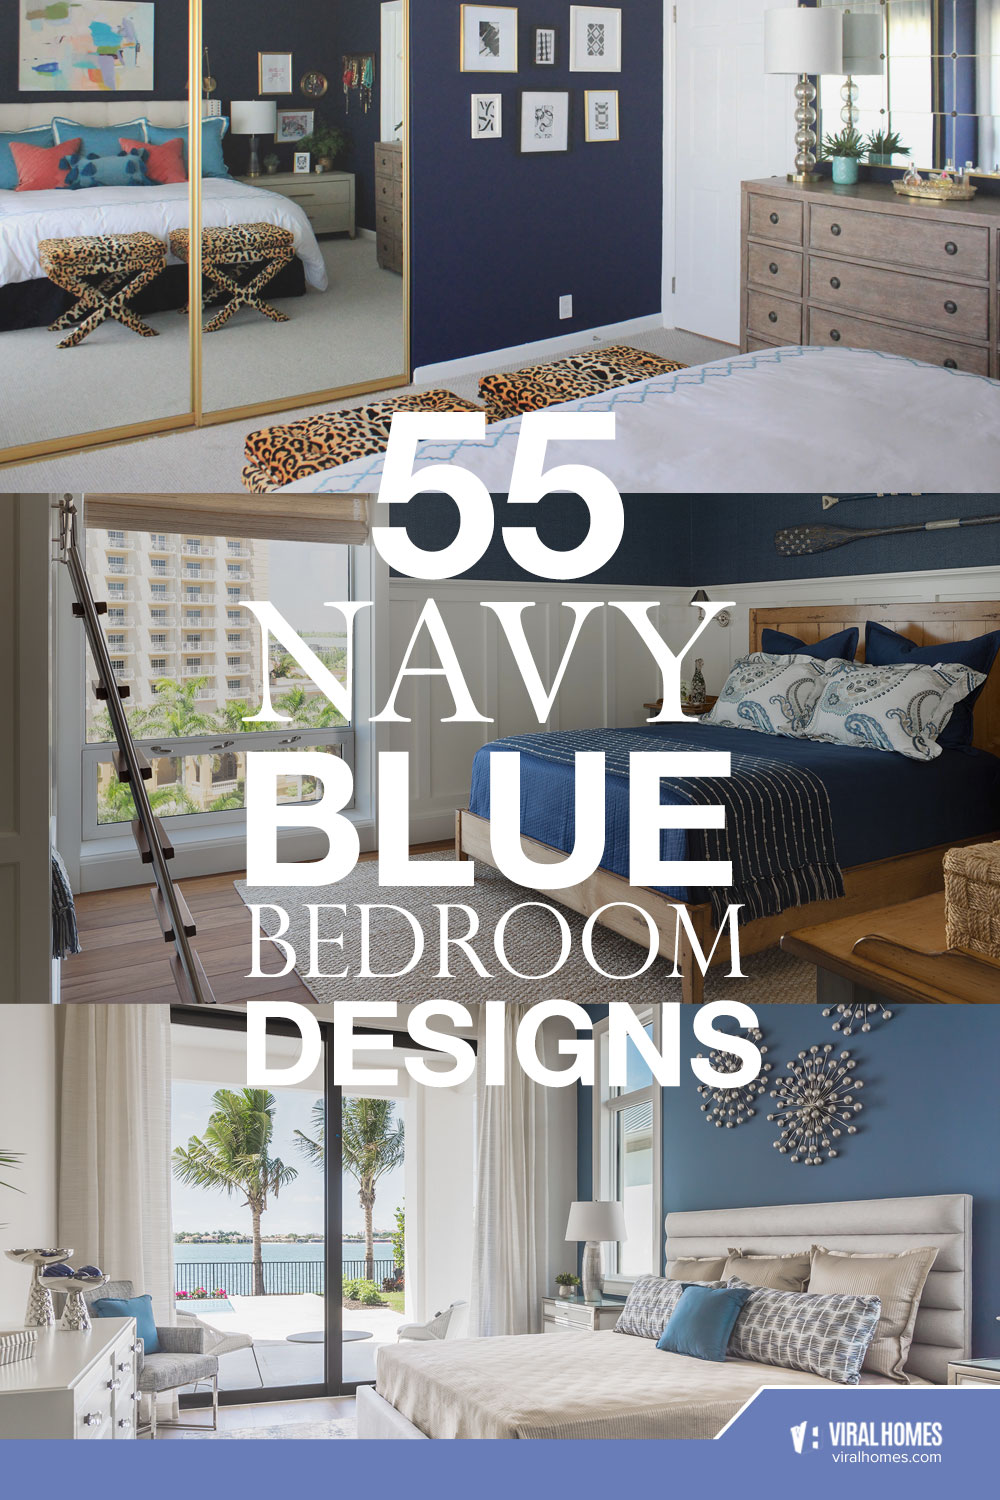 Navy Blue Bedroom Ideas for the Confident and Powerful